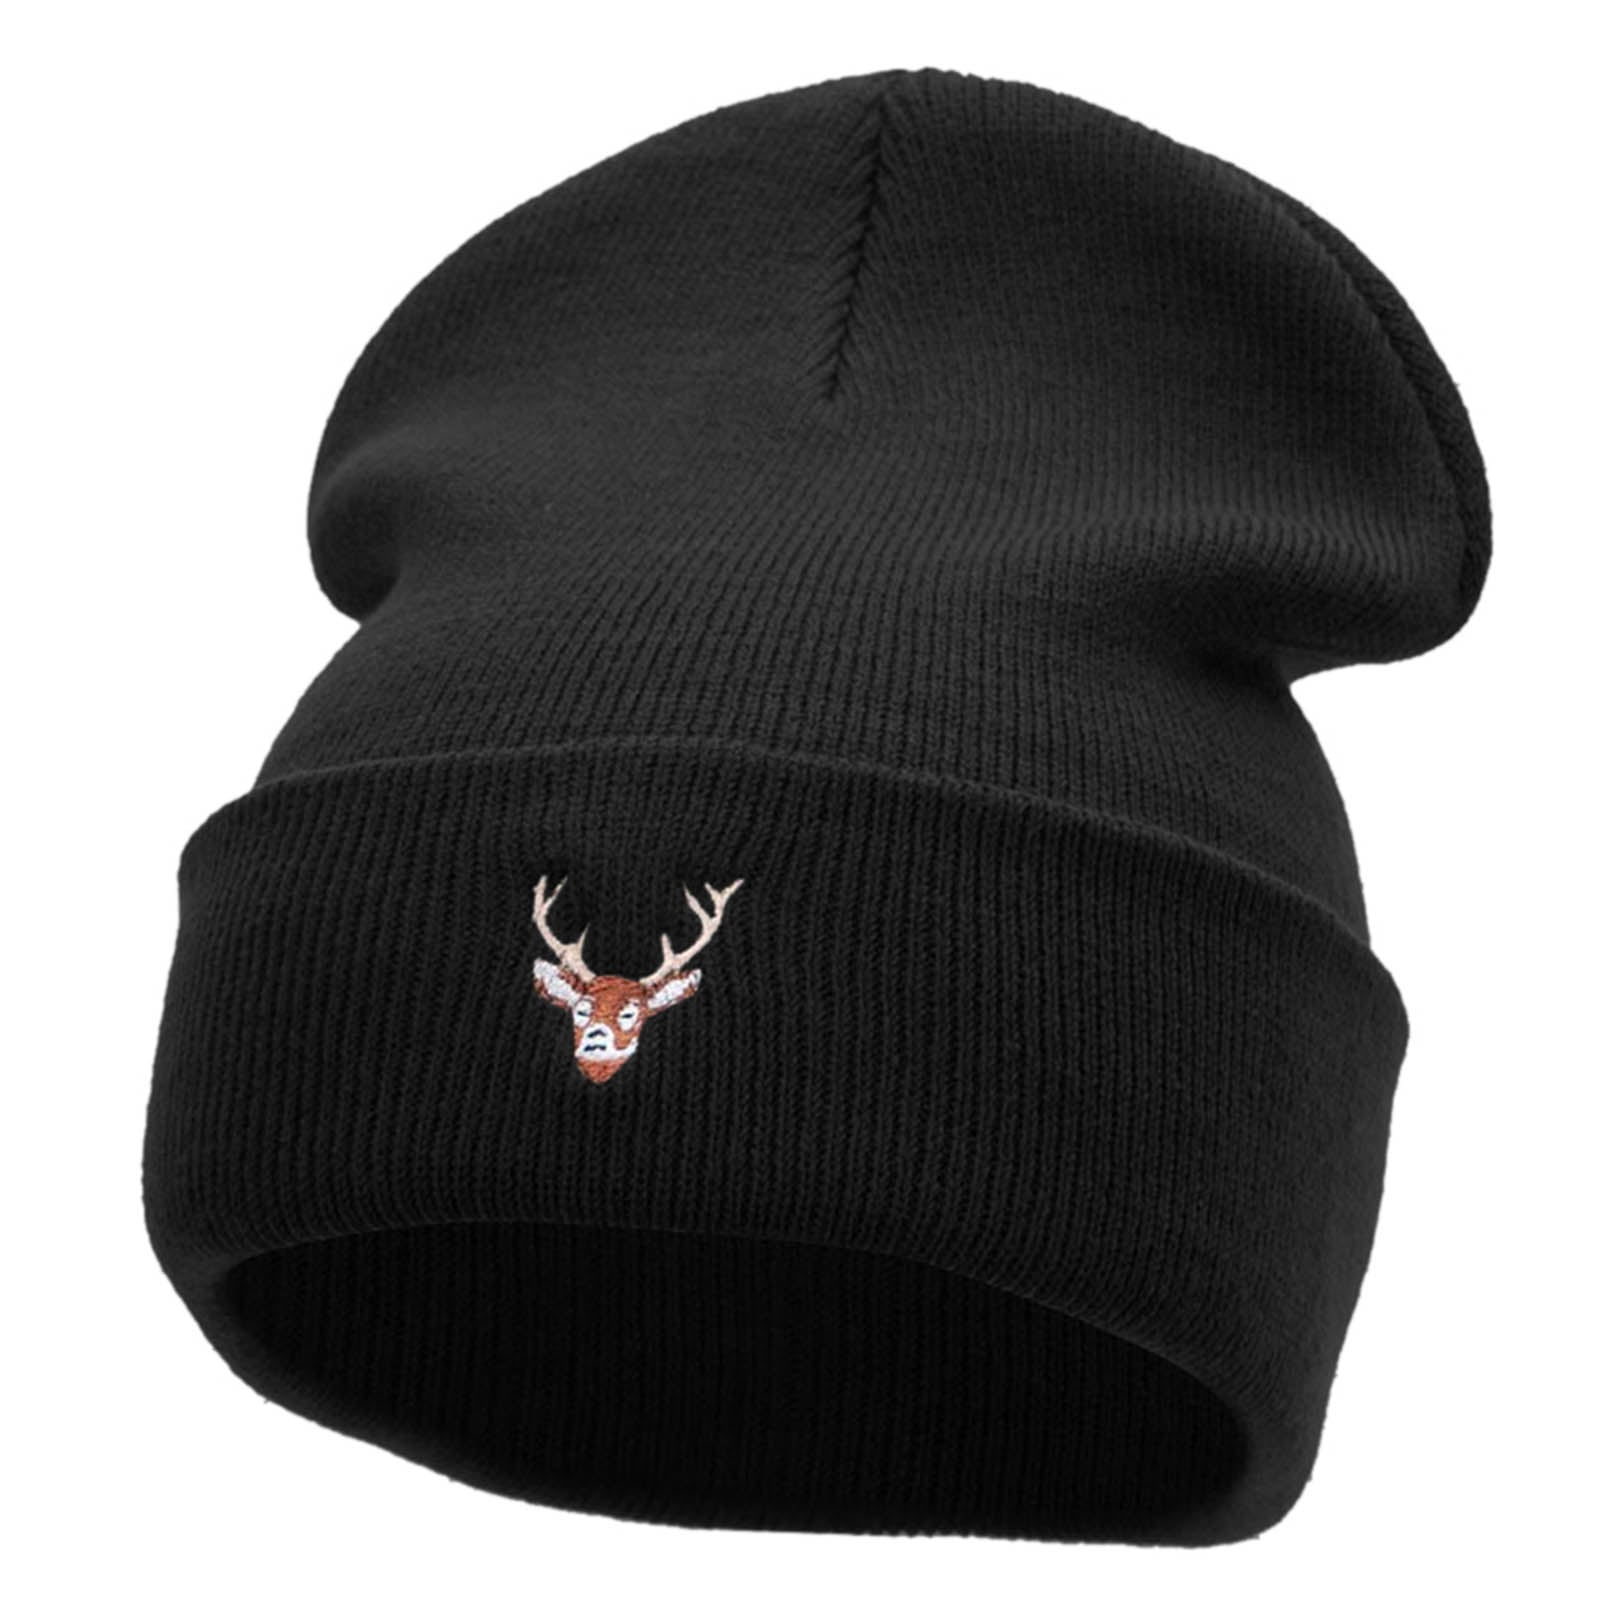 Mini Stag Embroidered 12 Inch Long Knitted Beanie - Black OSFM